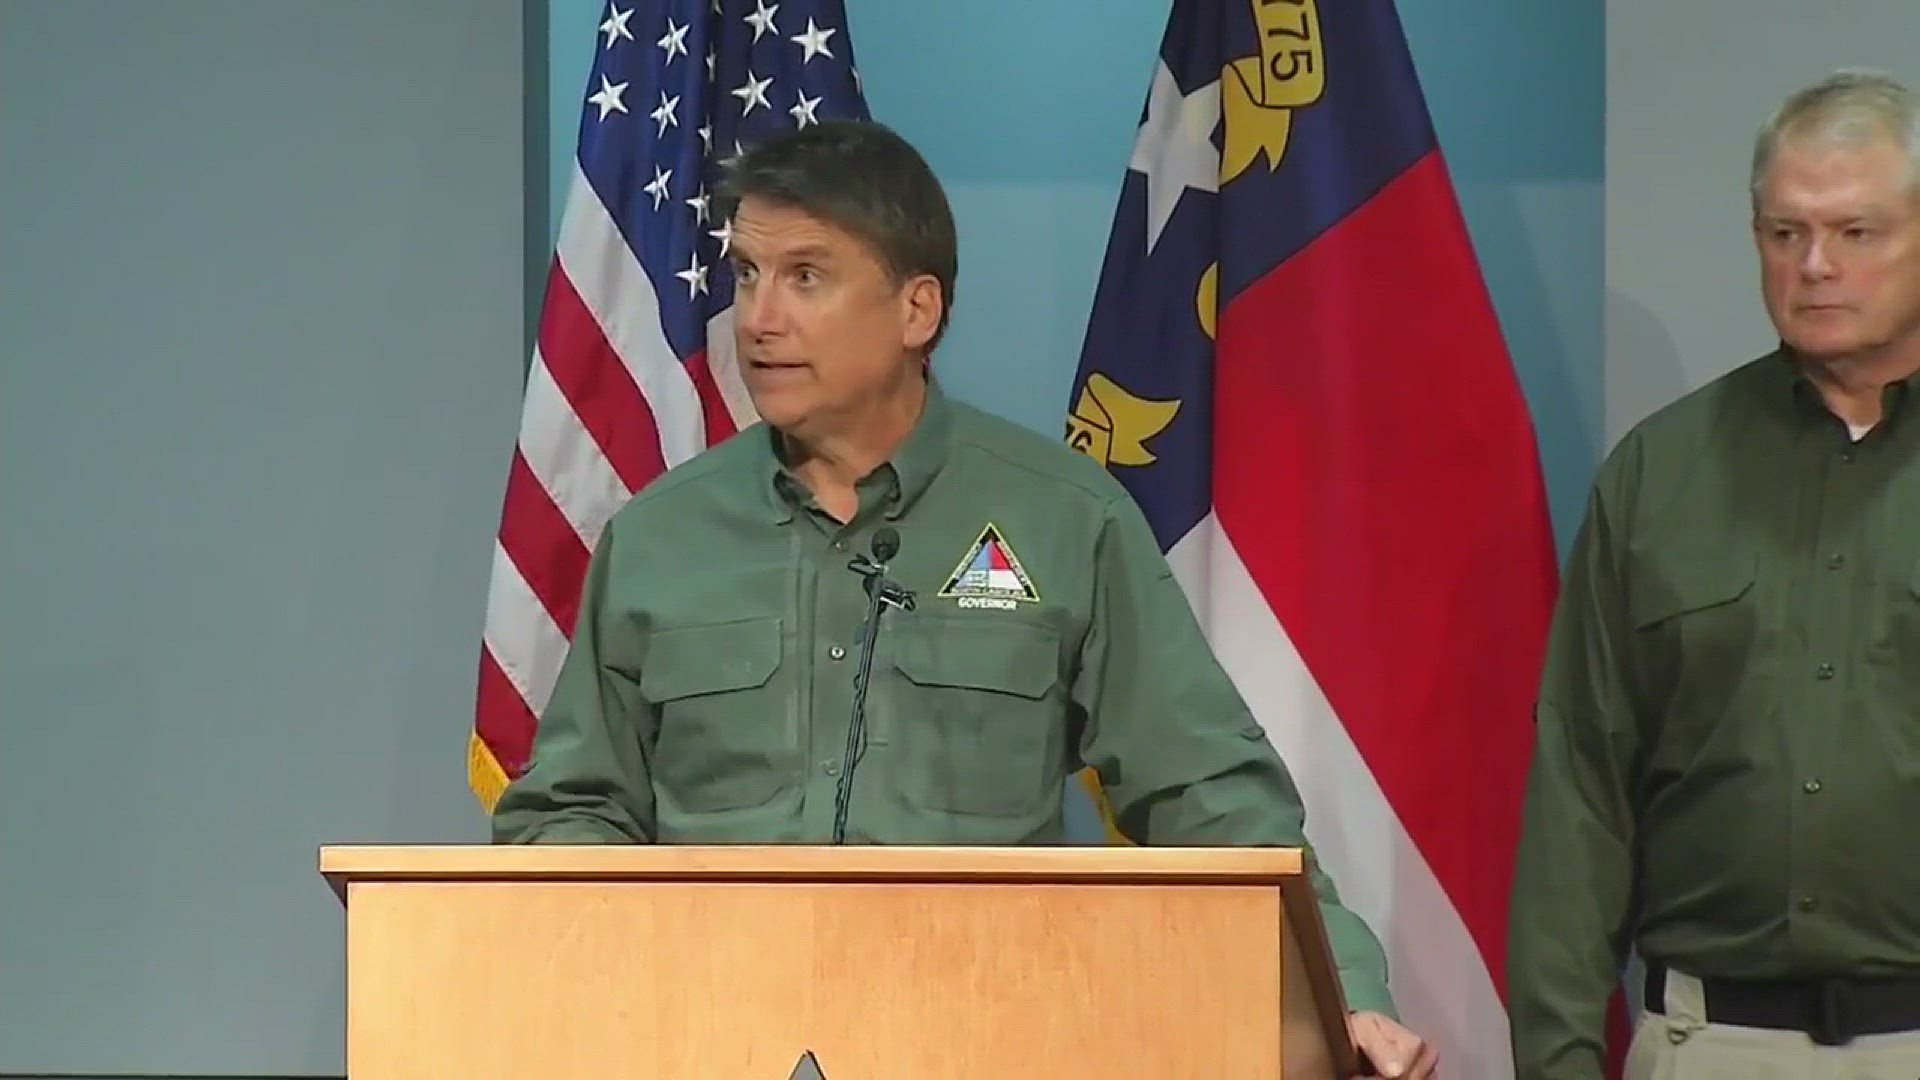 Governor McCrory Updates Flood Conditions